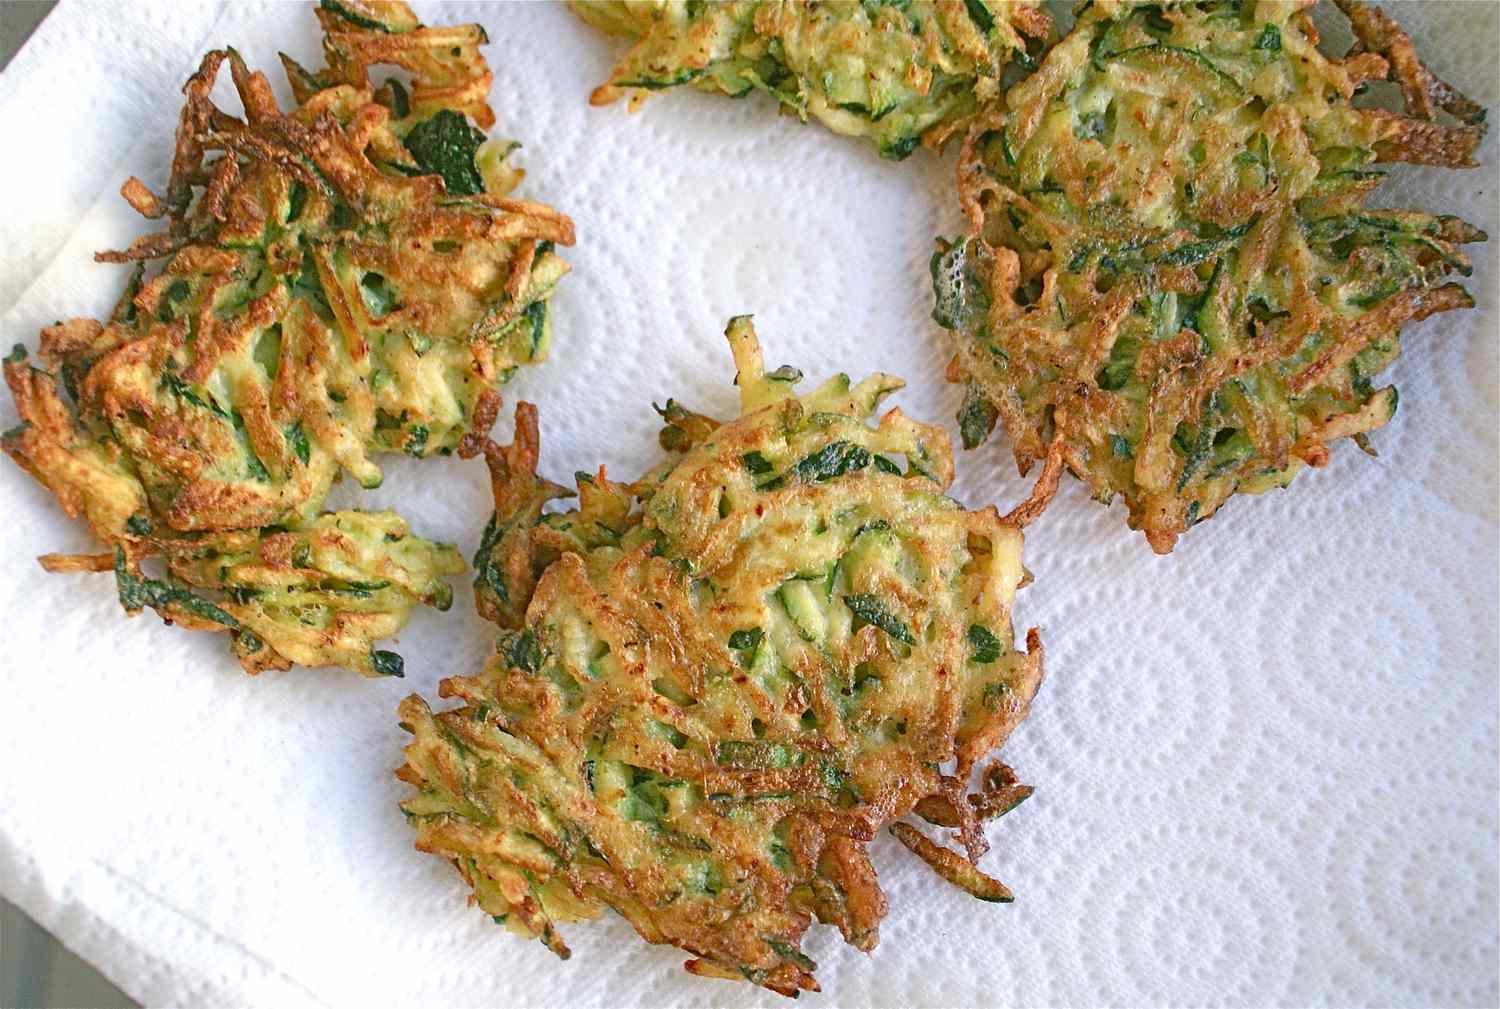 Brown and crispy zucchini fritters on a paper towel